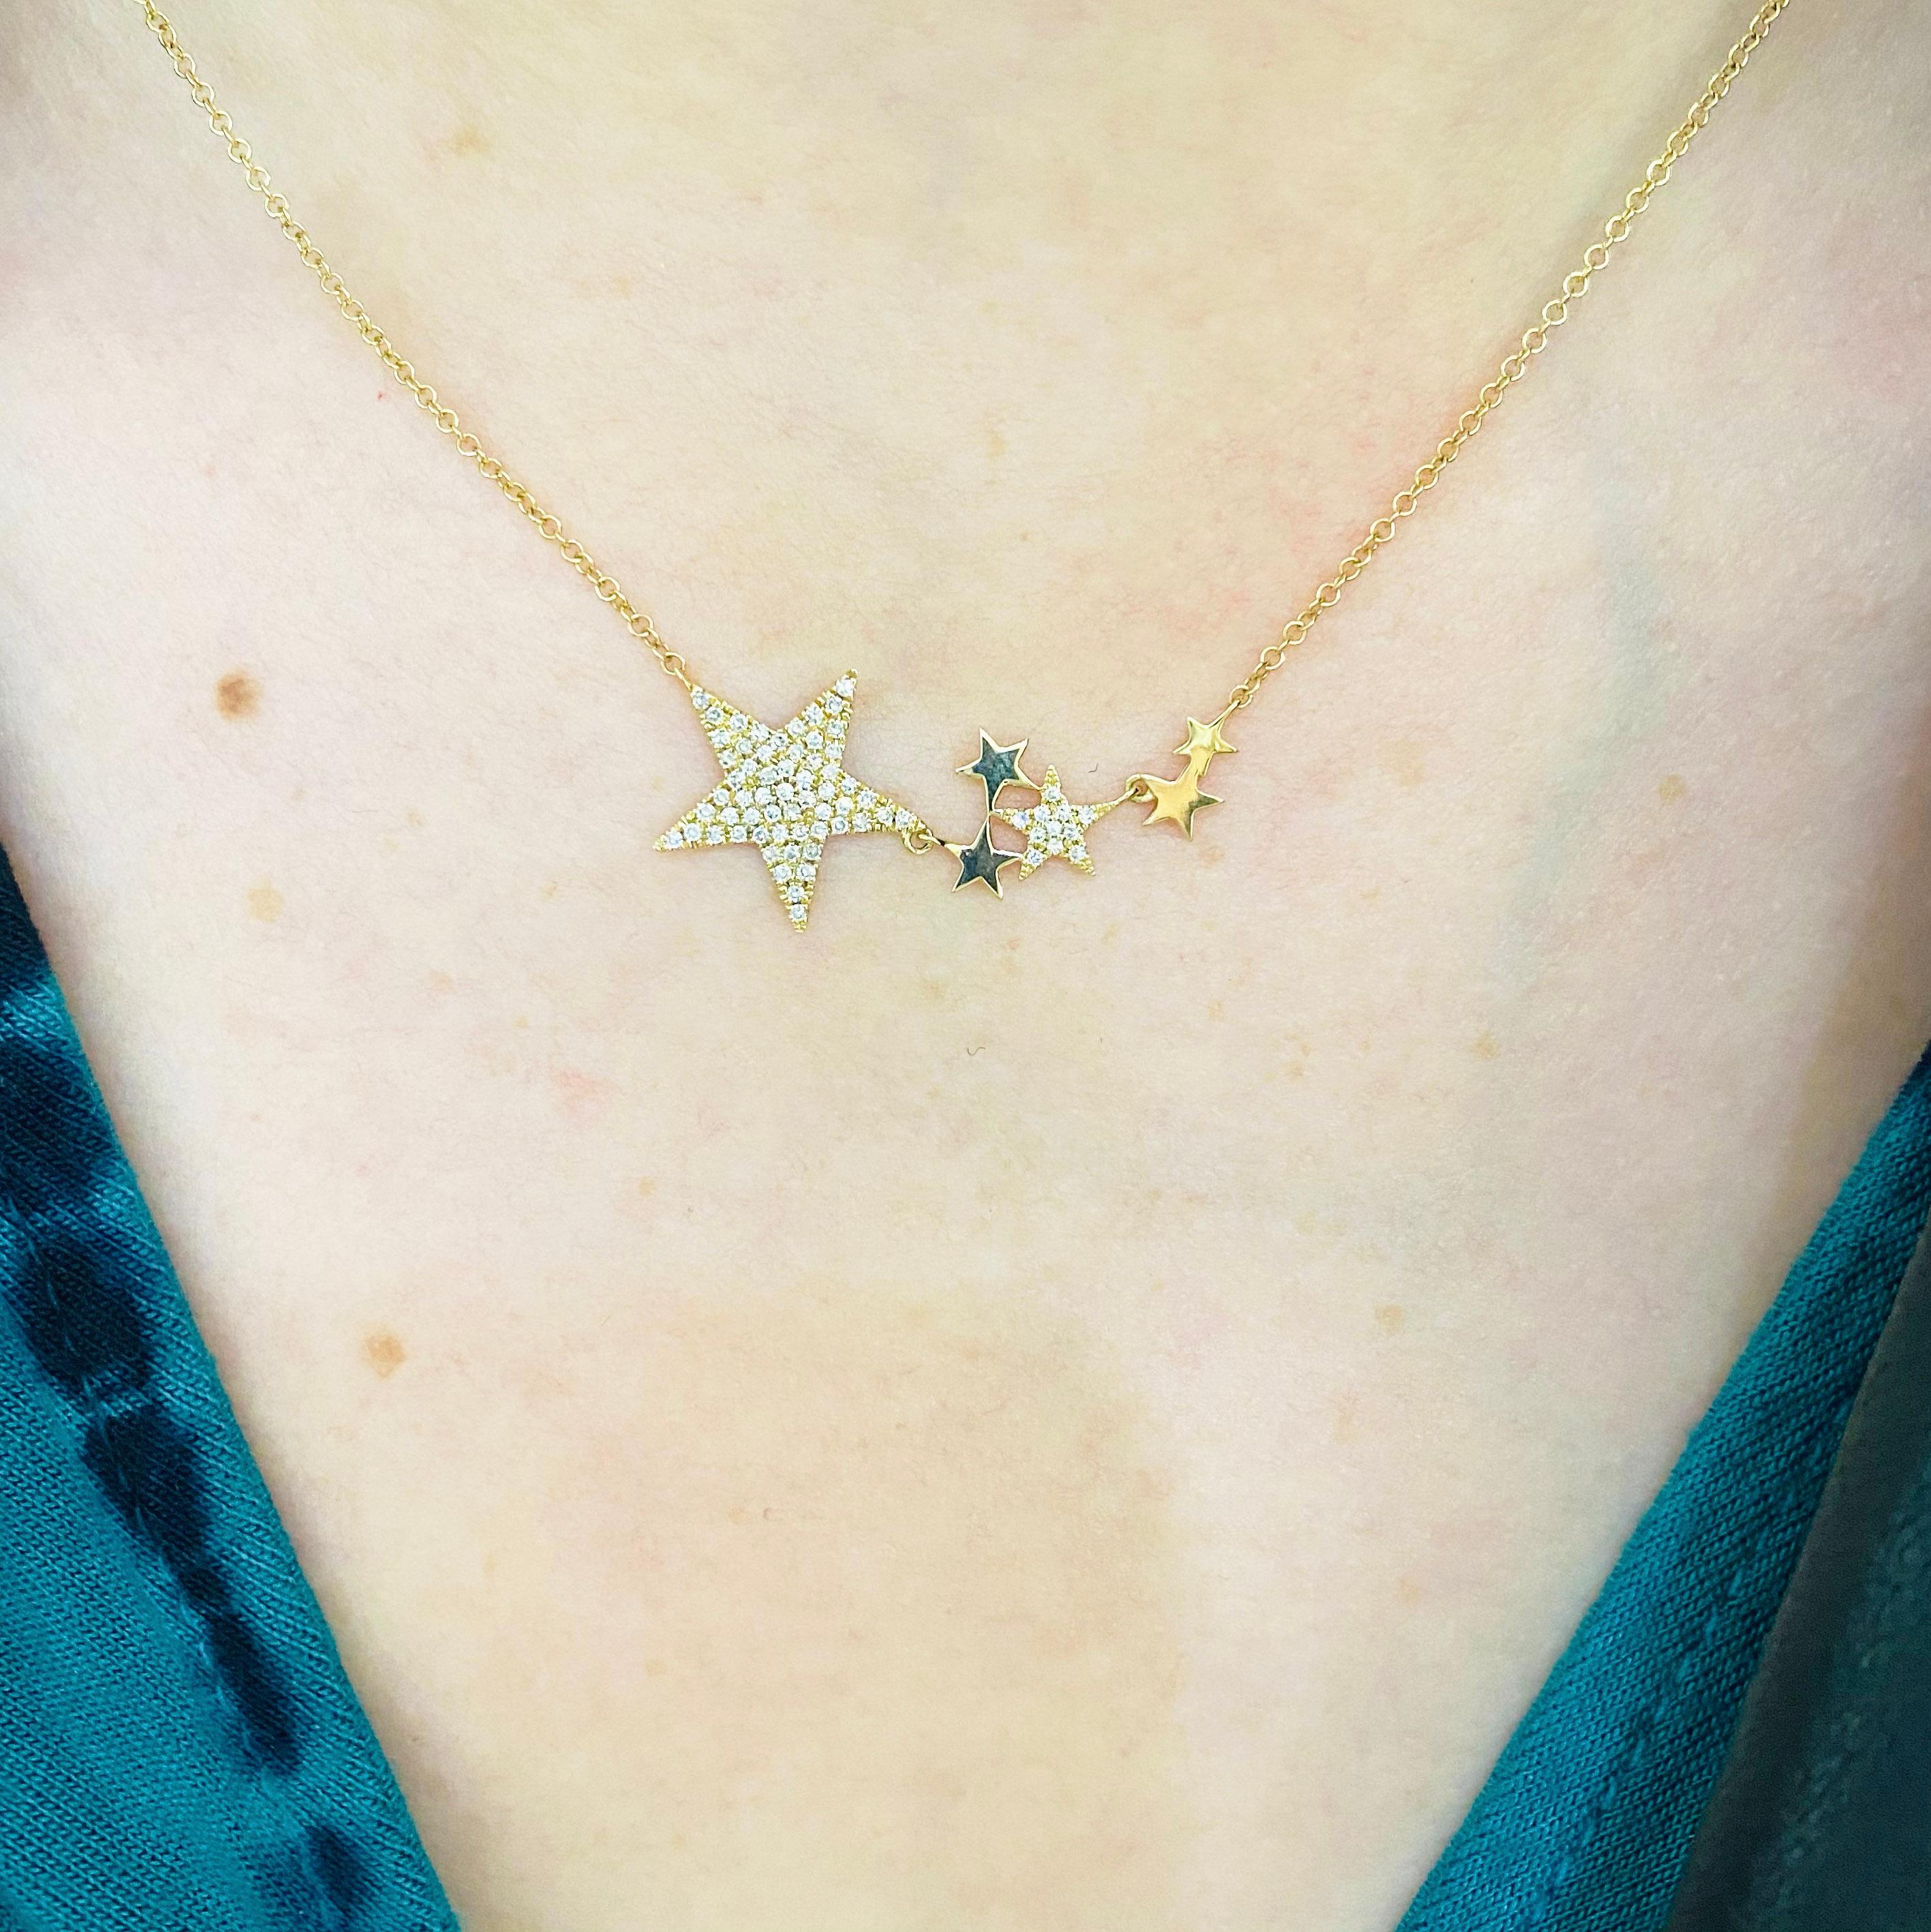 Catch a falling star!  This diamond star designer necklace is bold and beautiful! Made in 14K gold and sprinkled with genuine, natural diamonds. The necklace has a flexible star bar design with two of the brilliant stars paved with gorgeous white